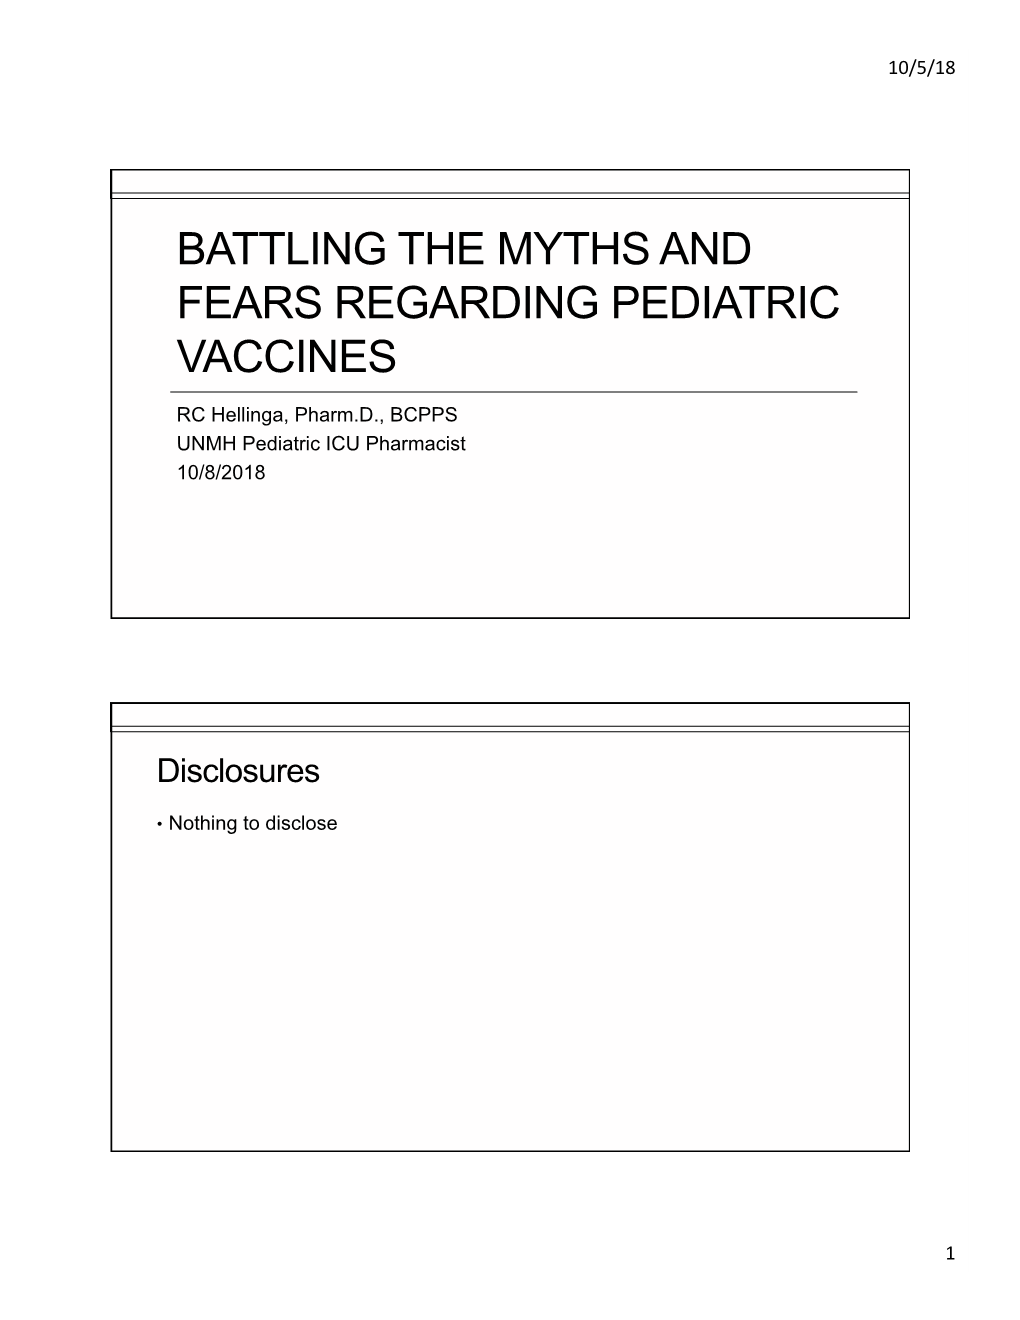 Battling the Myths and Fears Regarding Pediatric Vaccines